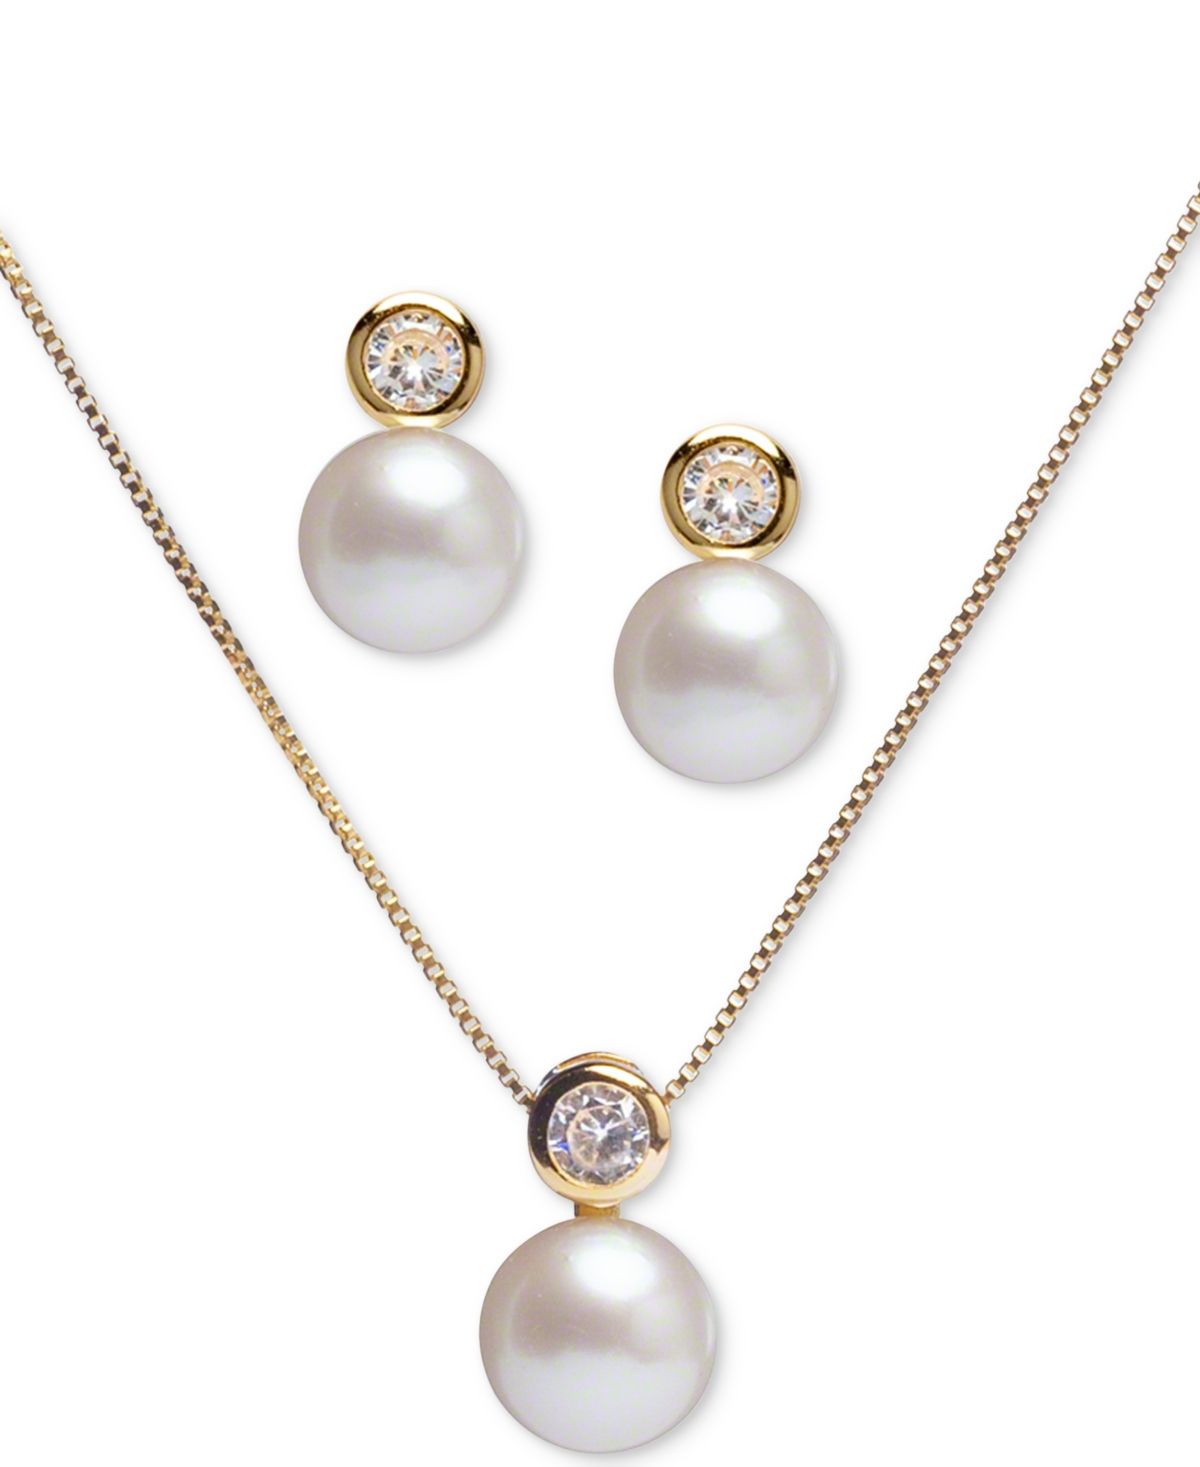 Timeless Beauty: Adorn Yourself with Stunning Pearl Jewelry Sets